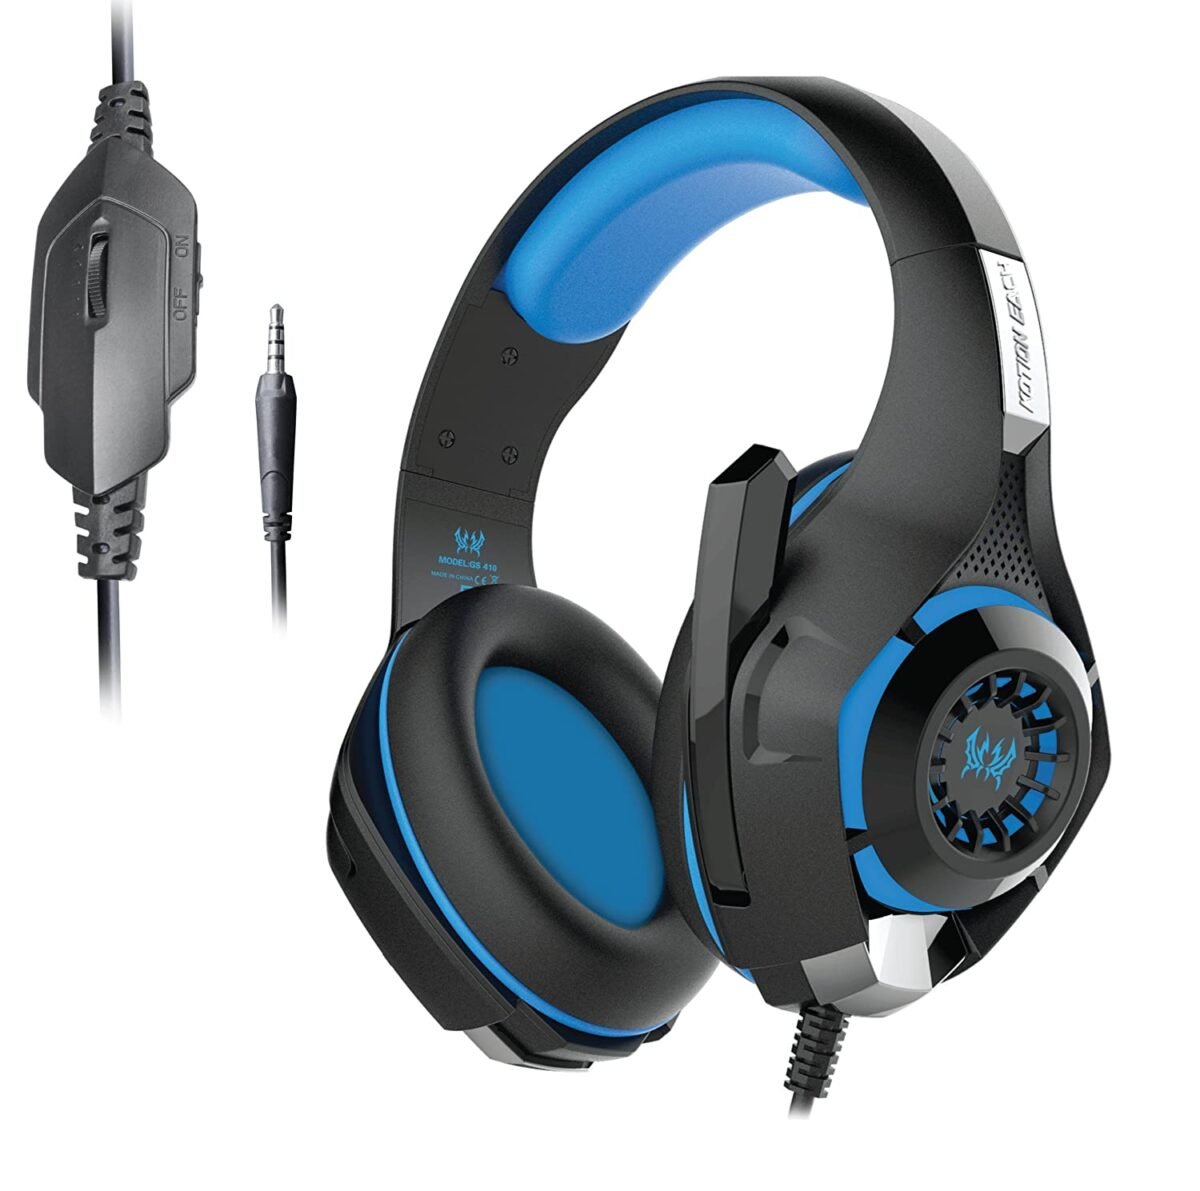 GS410 Headphones with Mic and for PS4, Xbox One, Laptop, PC, iPhone and Android